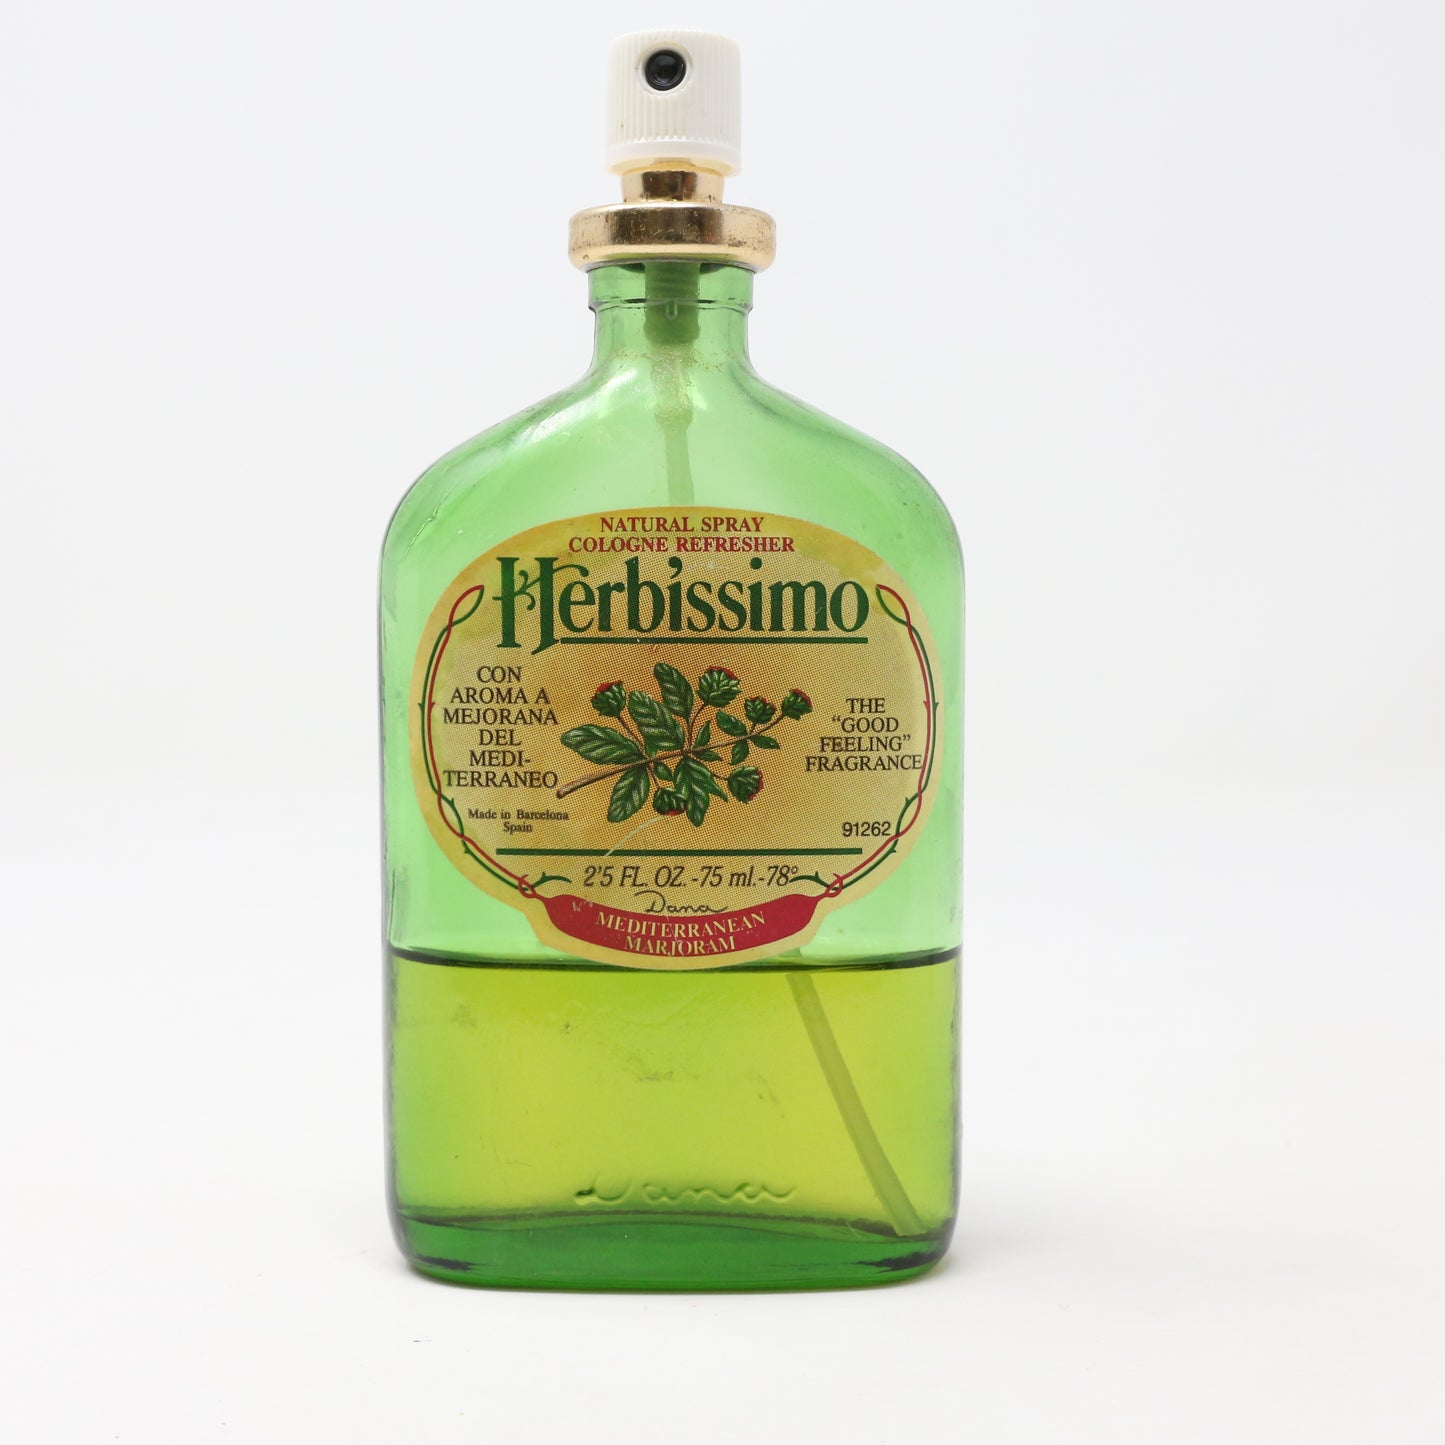 Mediterranean Cologne Refresher Low Fill 30% 75 mL